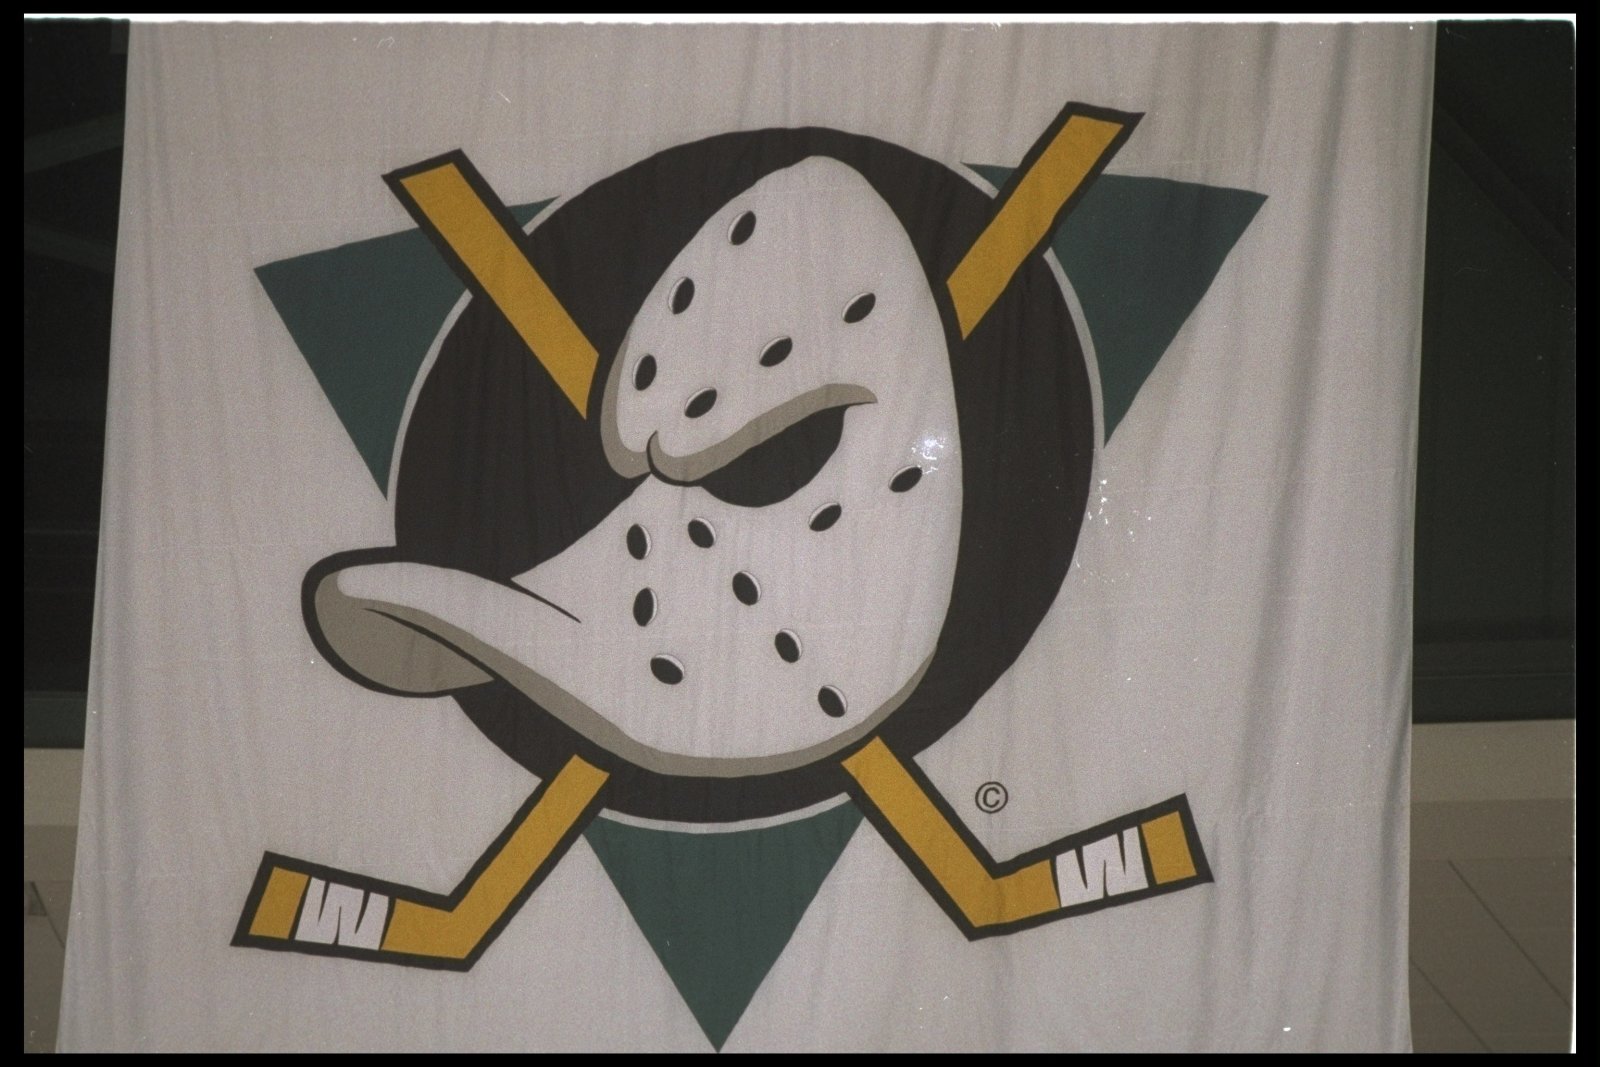 Like Kraken, Anaheim Ducks once were an NHL expansion franchise with a movie-themed  name